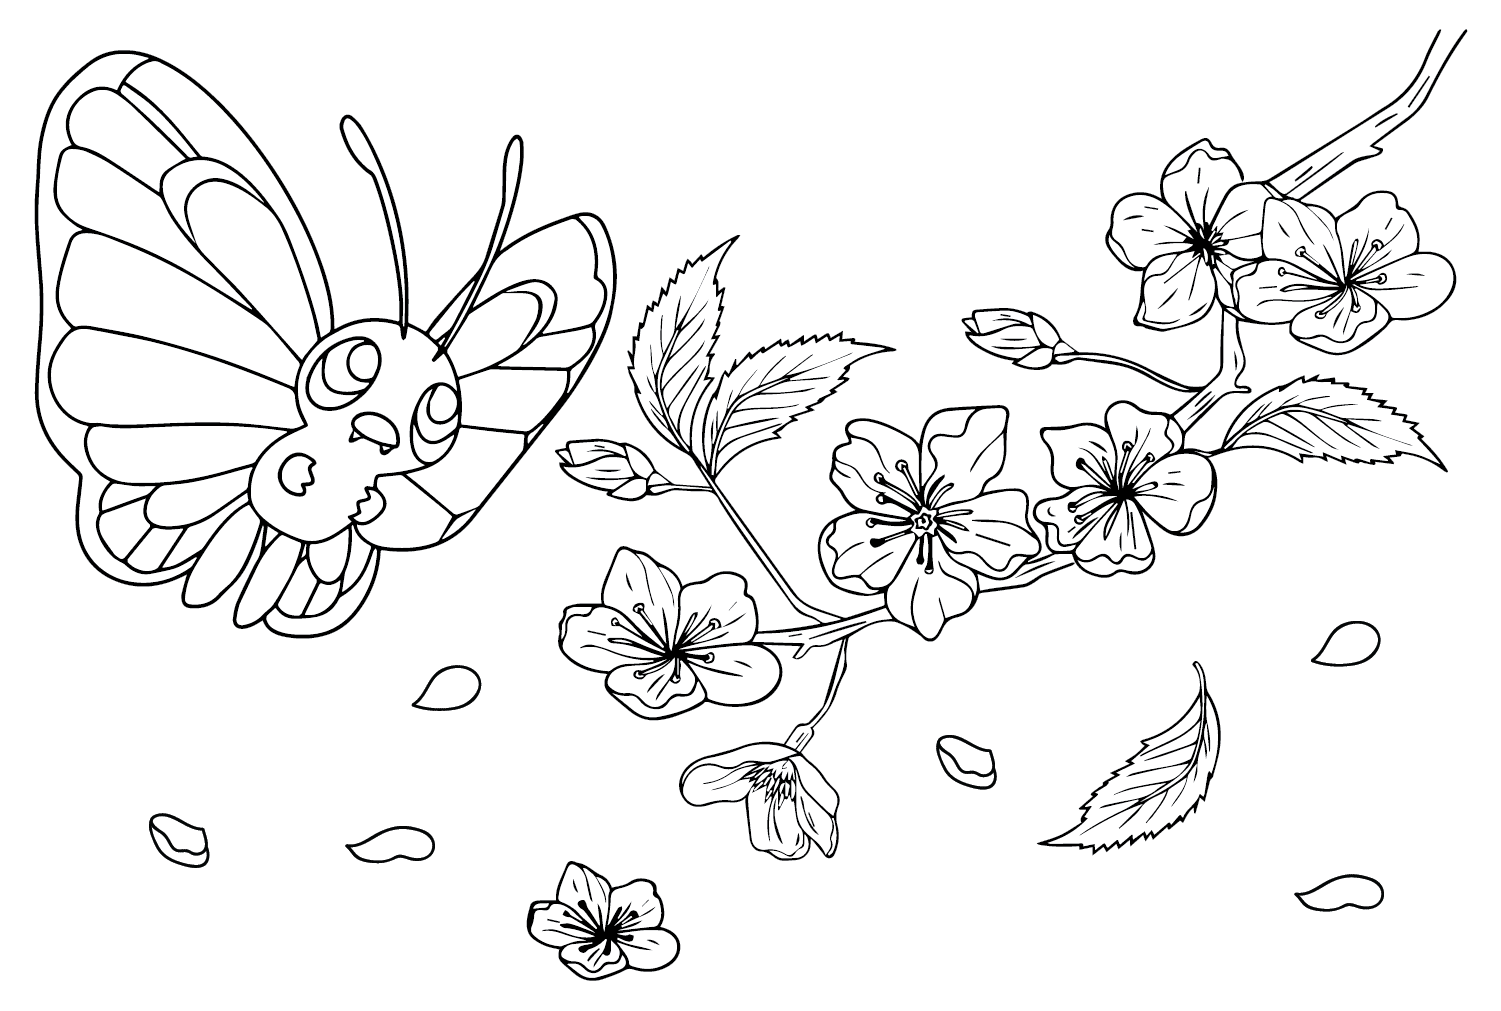 Butterfree Coloring Pages to for Kids from Butterfree